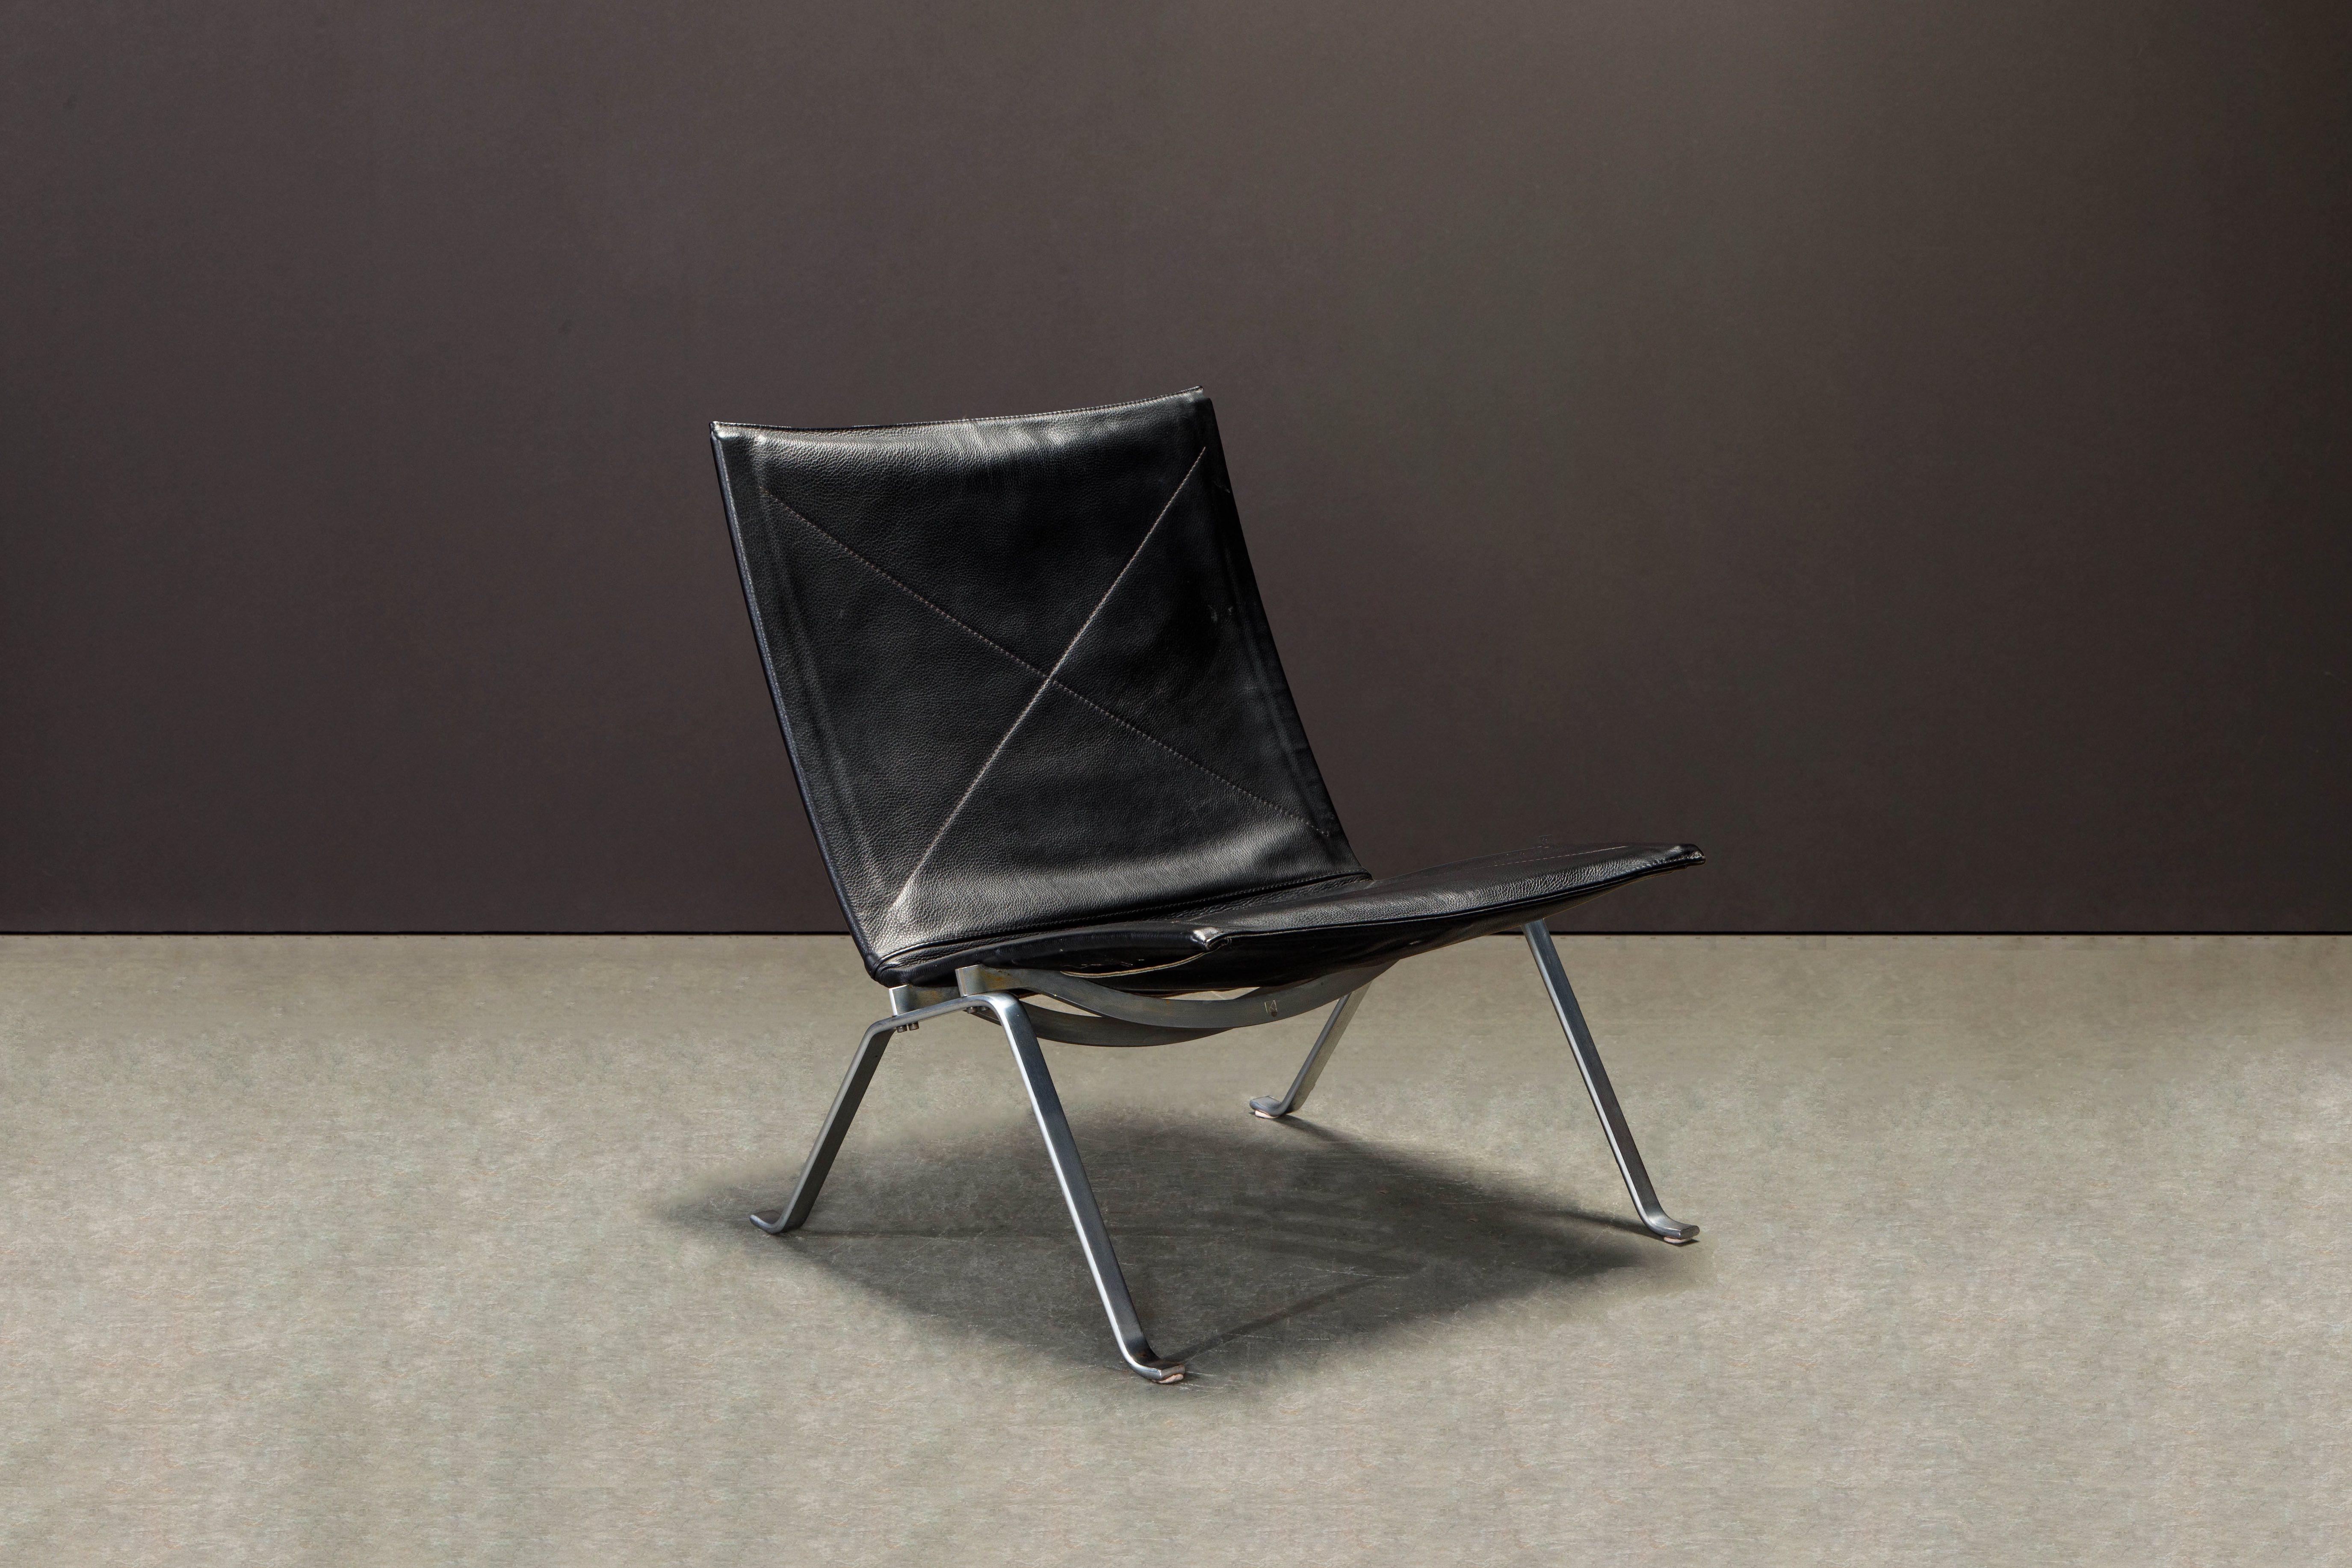 Steel Pair of 'PK-22' Lounge Chairs by Poul Kjærholm for EKC, Signed